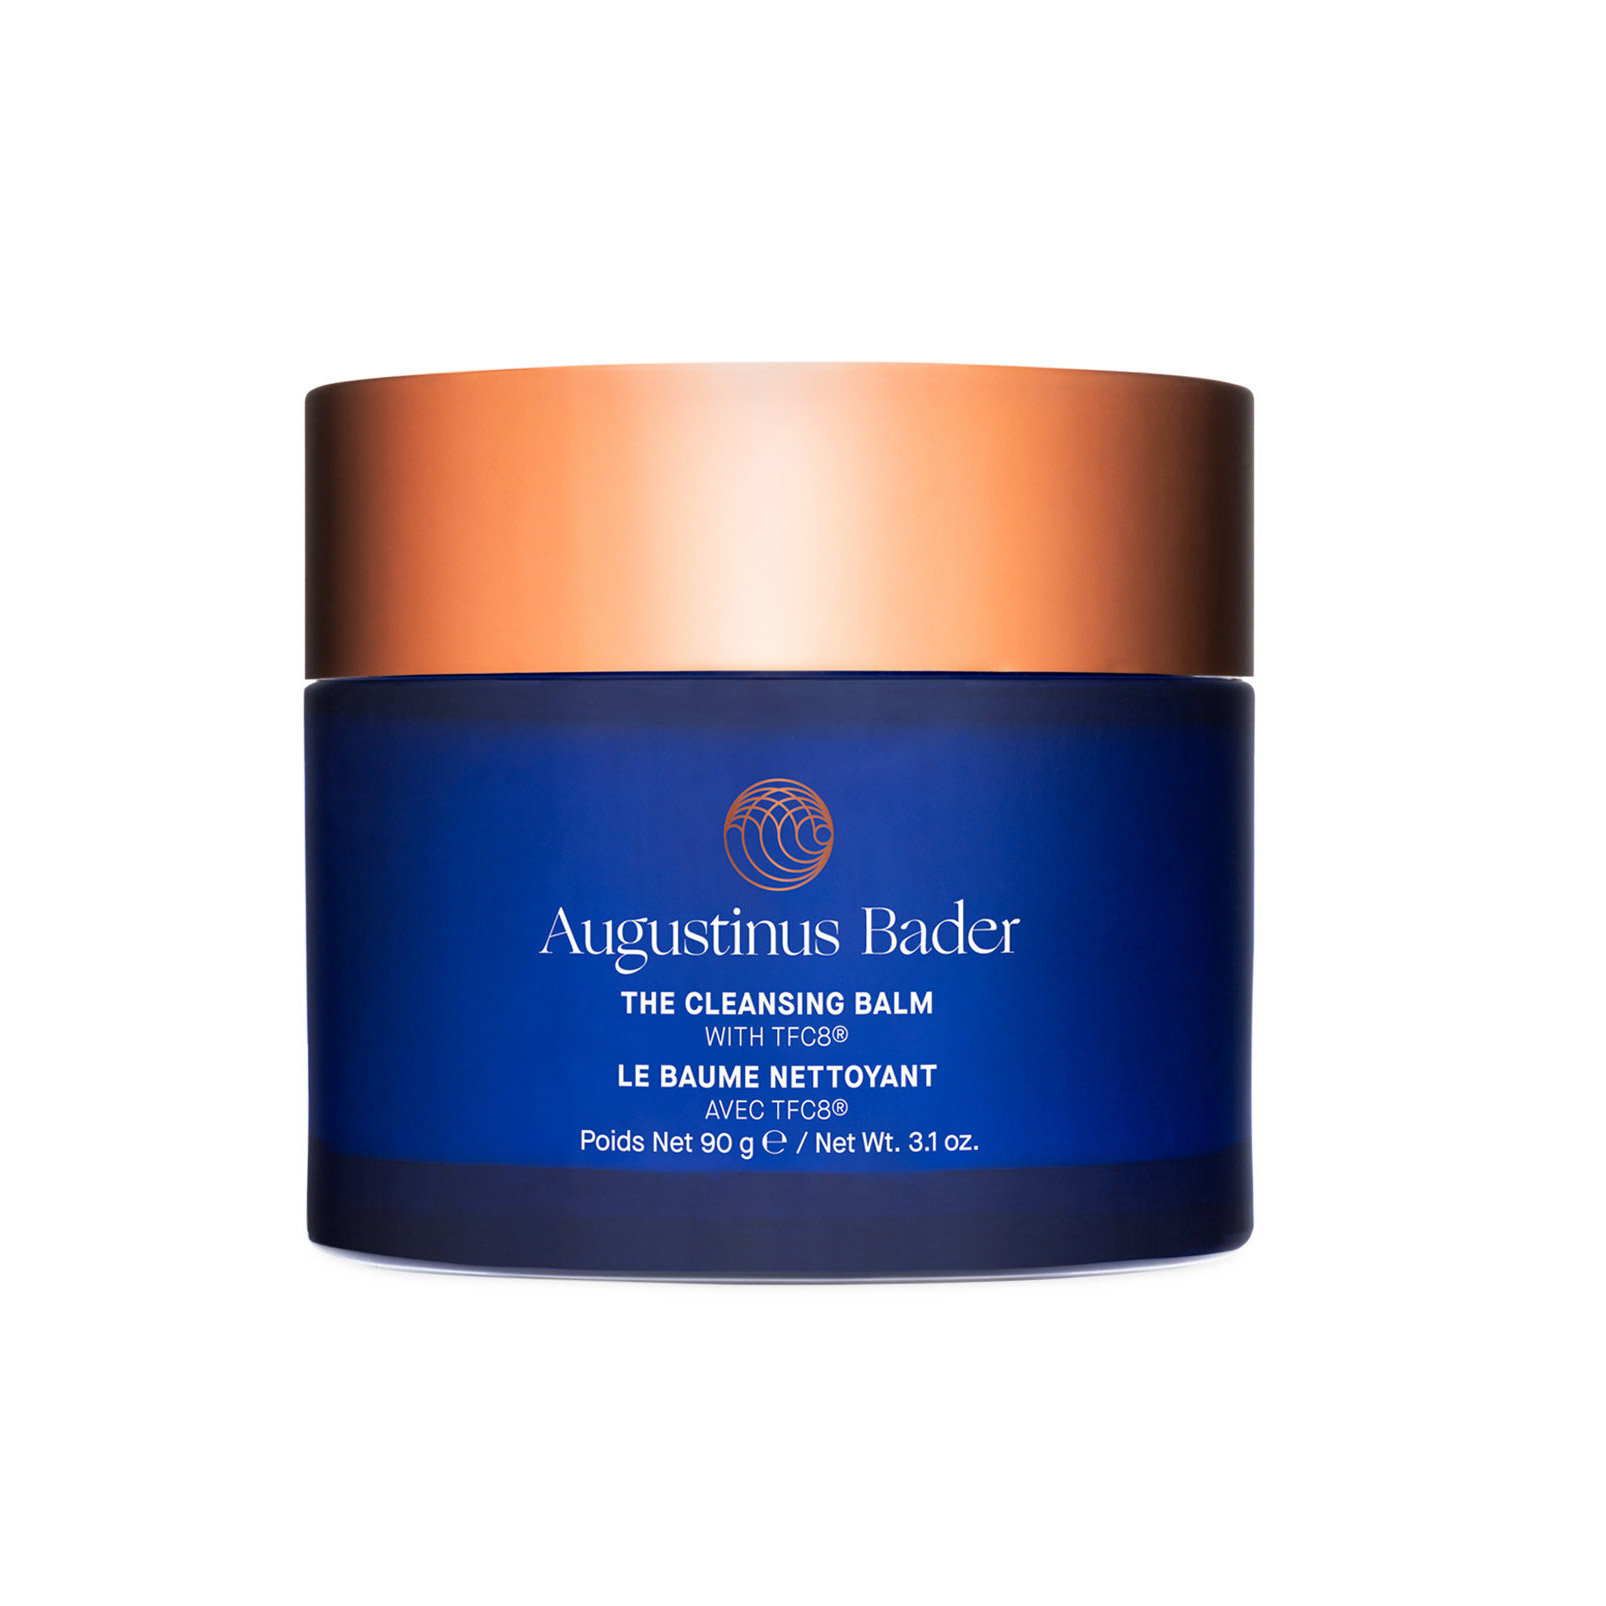 Shop the Augustinus Bader The Cleansing Balm on Beautylish.com! 